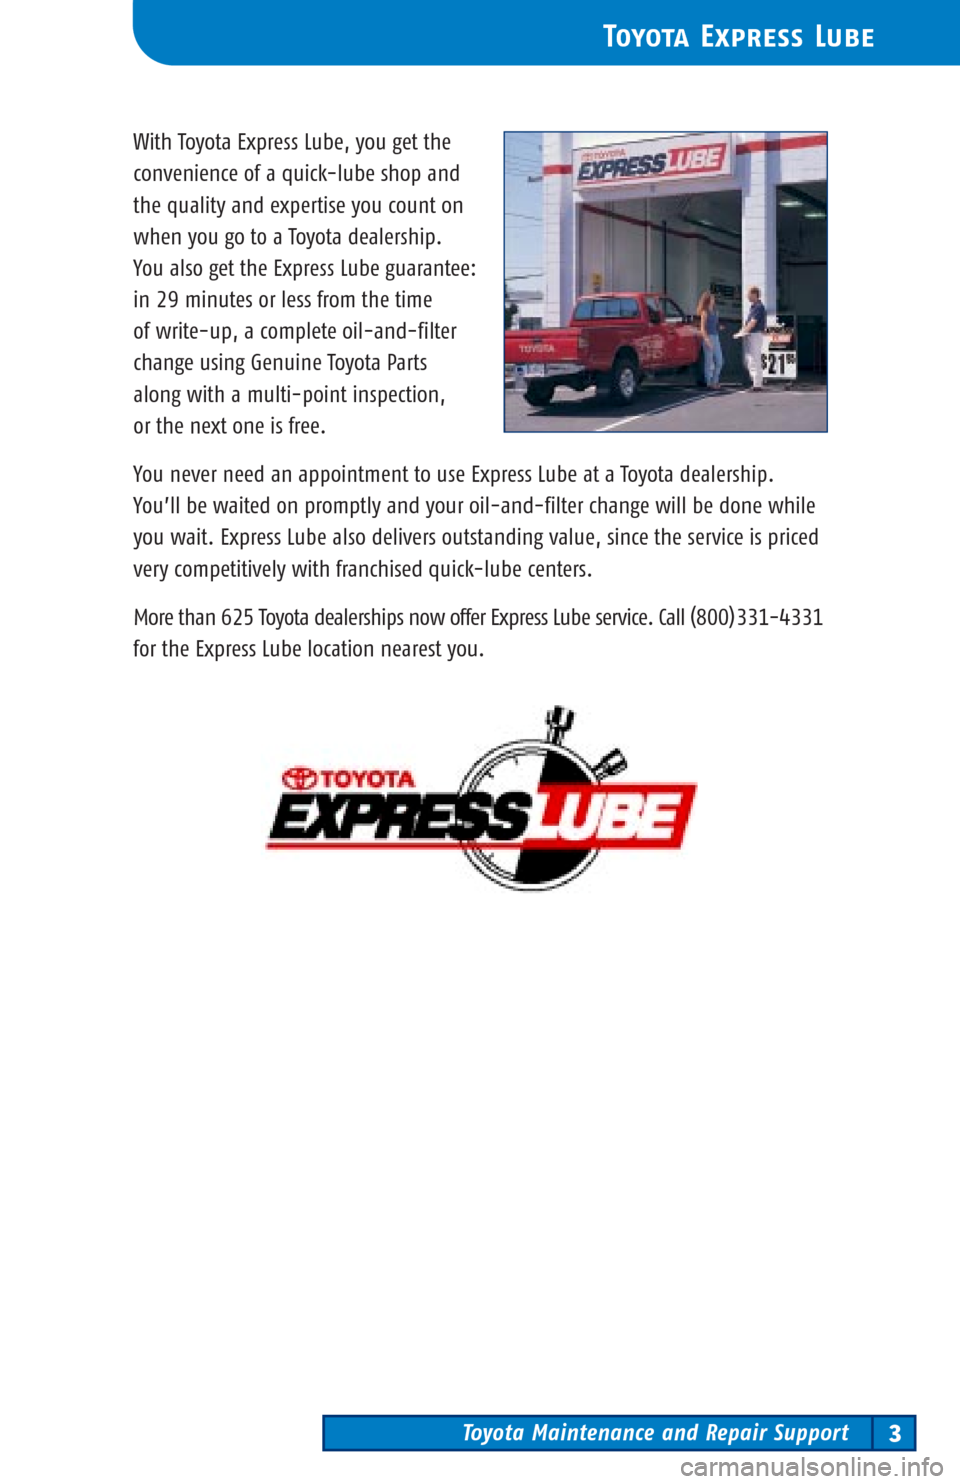 TOYOTA 4RUNNER 2002 N210 / 4.G Scheduled Maintenance Guide Toyota Maintenance and Repair Support3
Toyota Express Lube
With Toyota Express Lube, you get the
convenience of a quick-lube shop and 
the quality and expertise you count on
when you go to a Toyota de